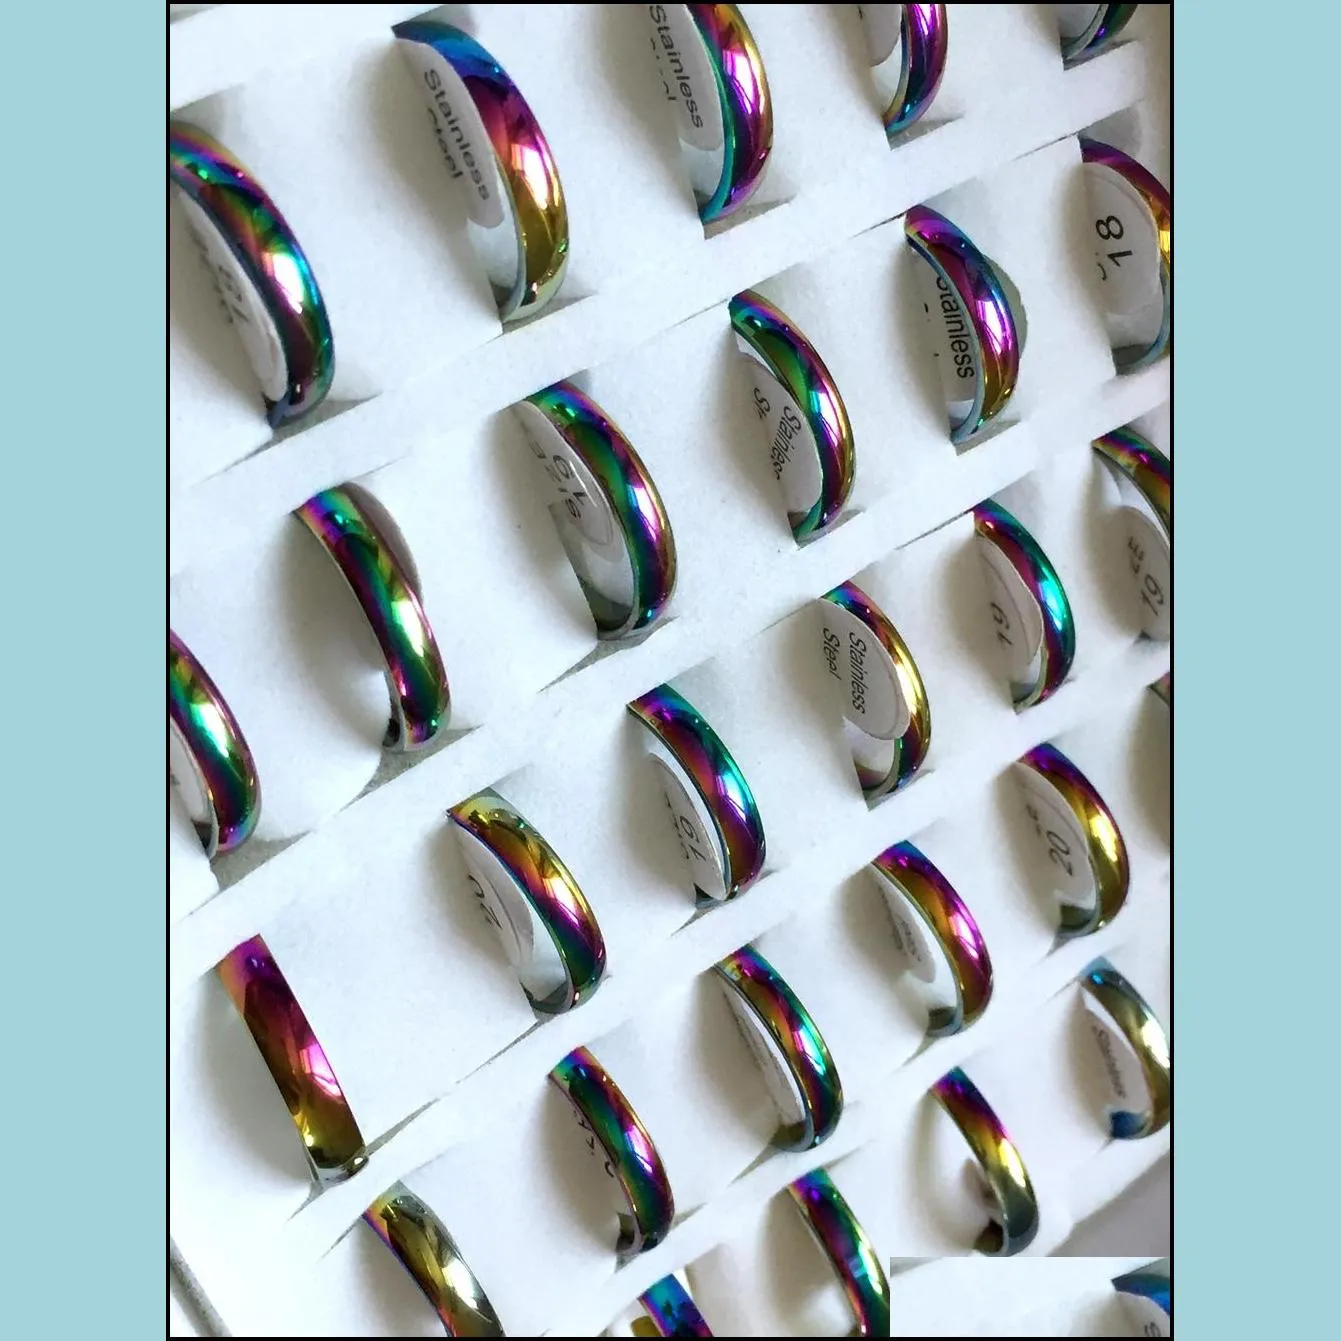 50pcs colorful mix 4 6 8mm band rings men women stainless steel rings wholesale fashion jewelry lots